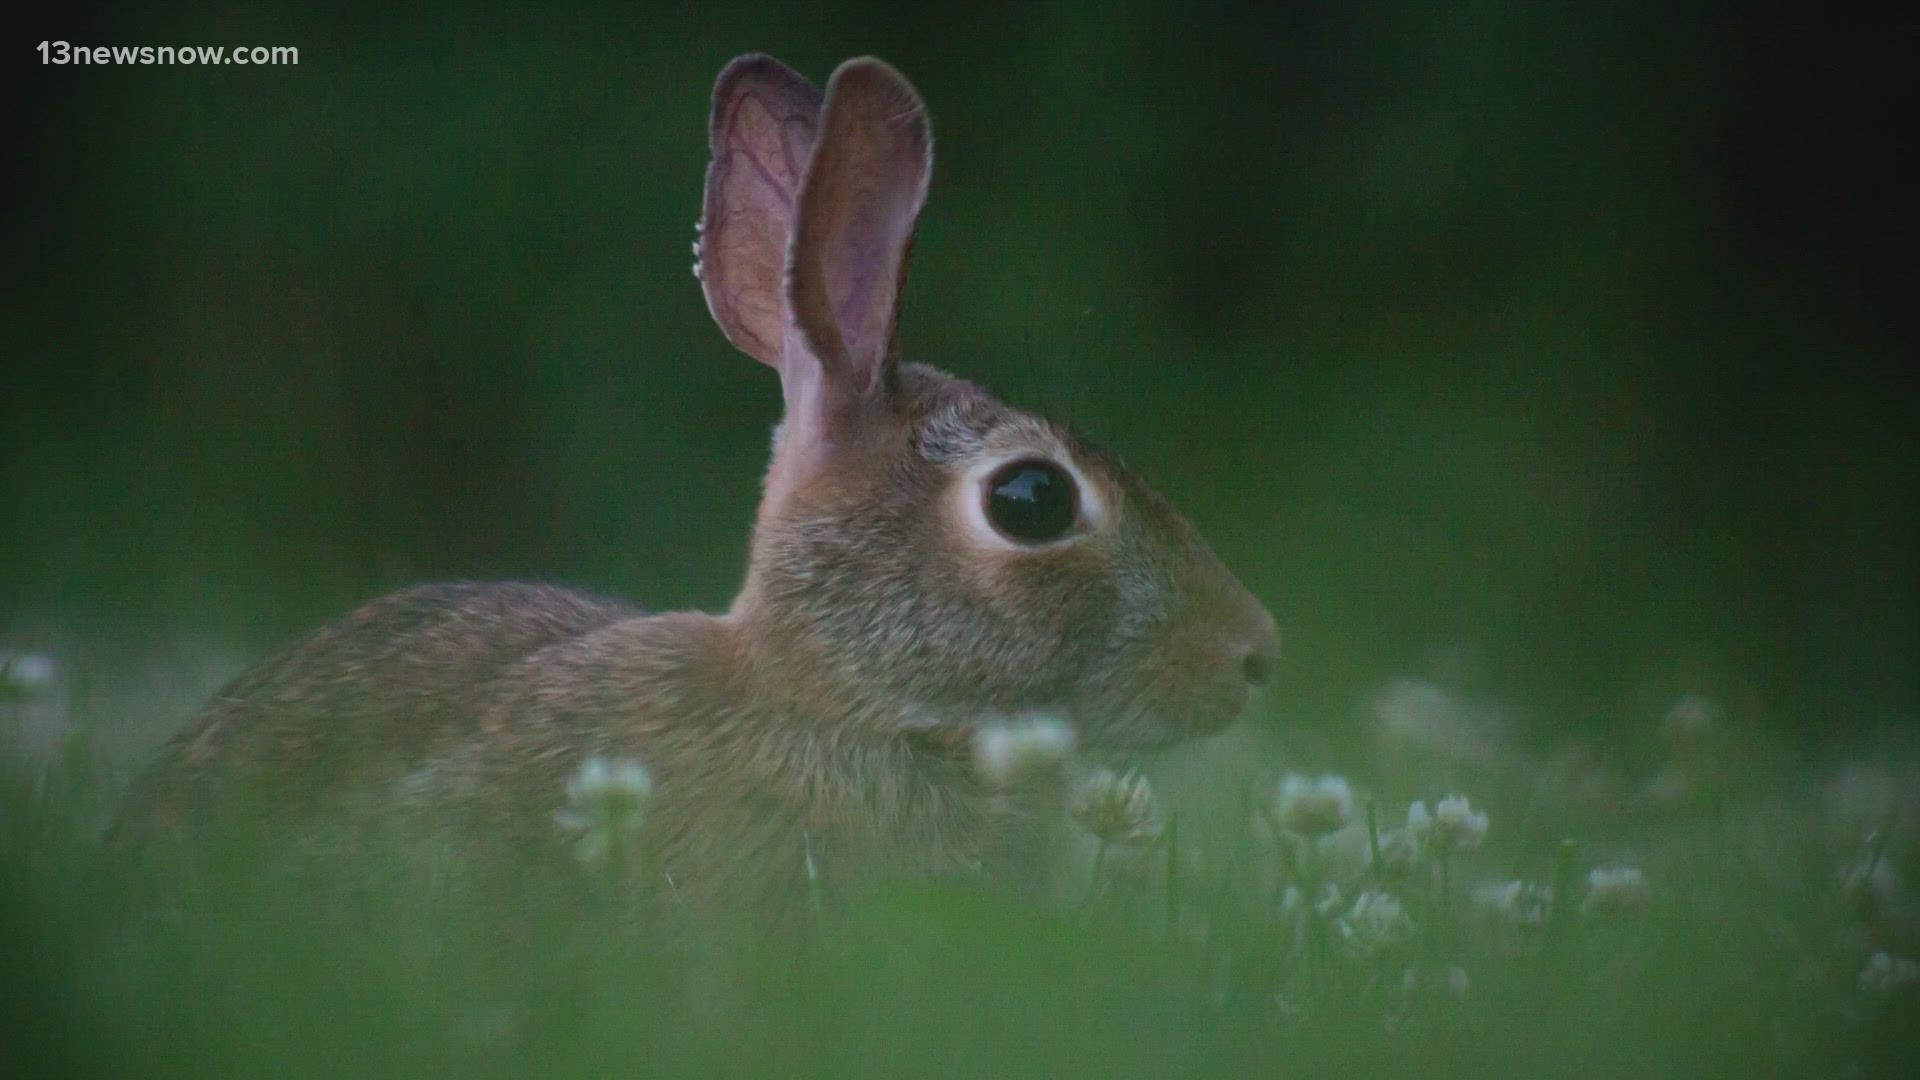 One man in Virginia Beach reported seeing 28 rabbits during a recent walk.